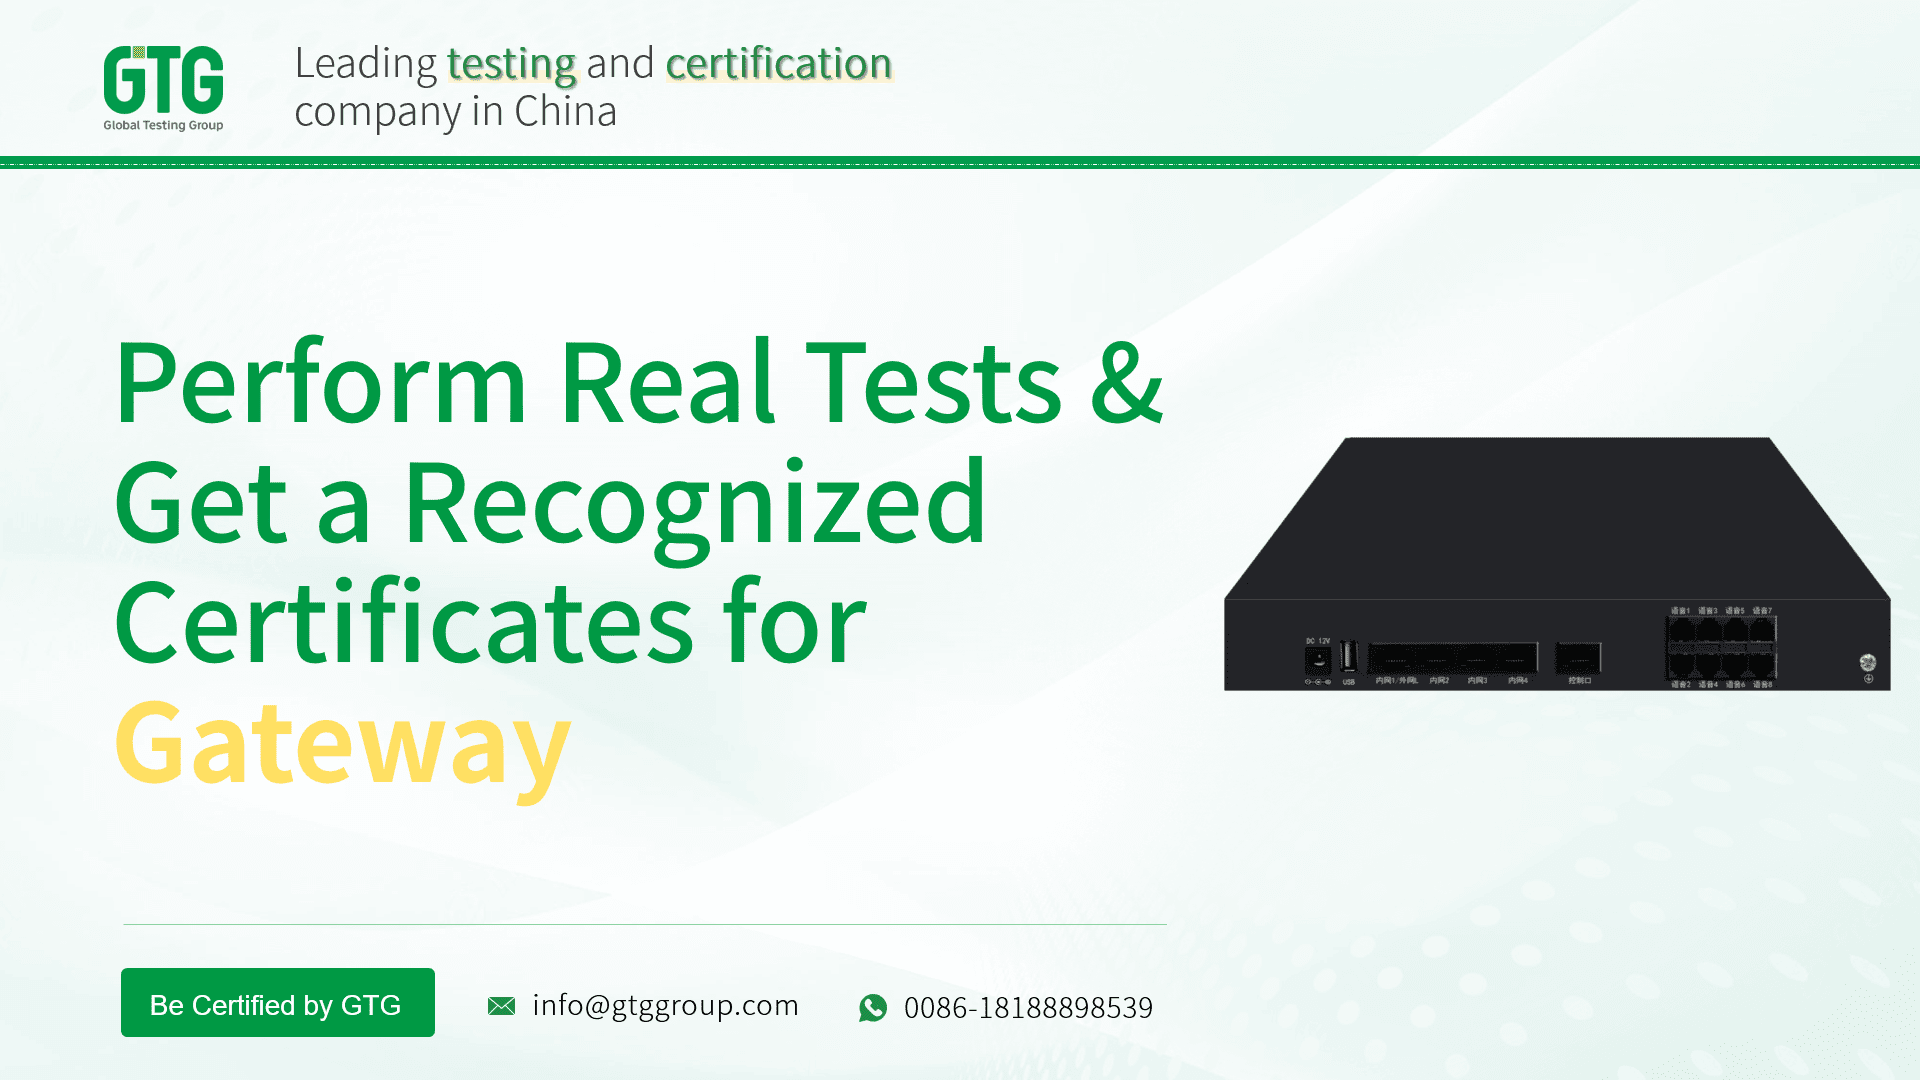 Get Test Report and Certifications for Gateway from GTG Group